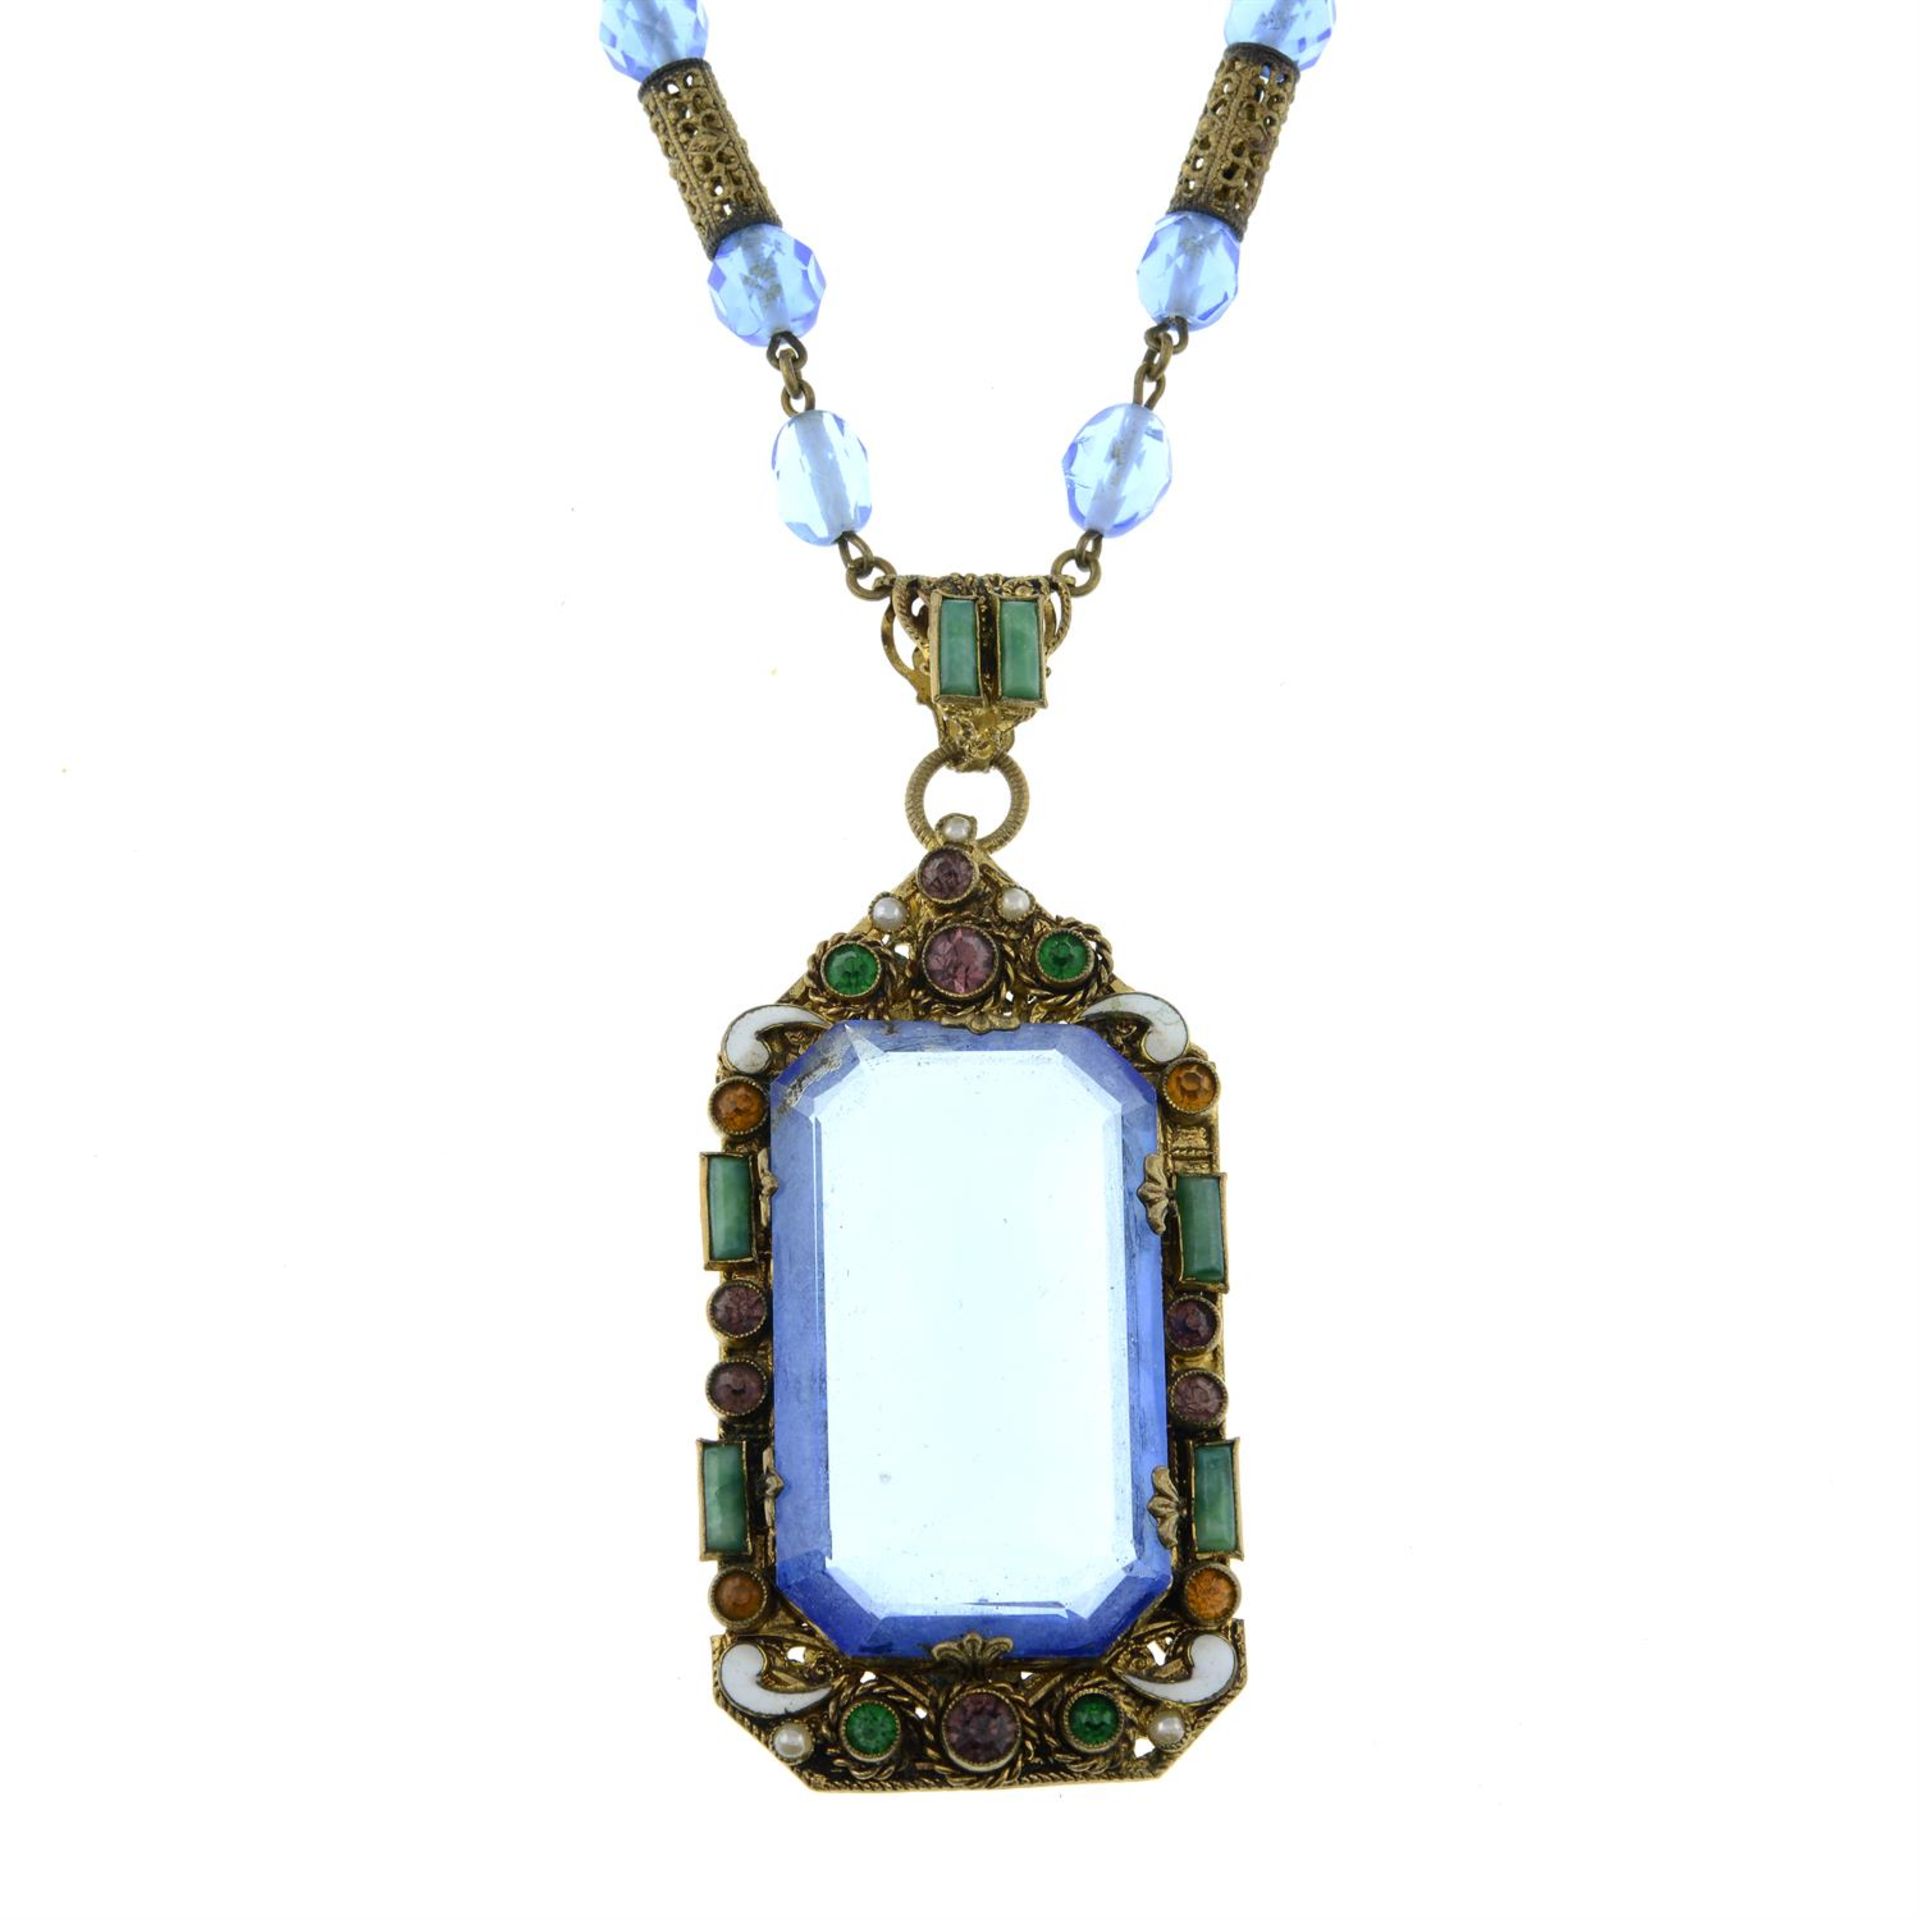 An early 20th century continental paste pendant, on an integral chain.